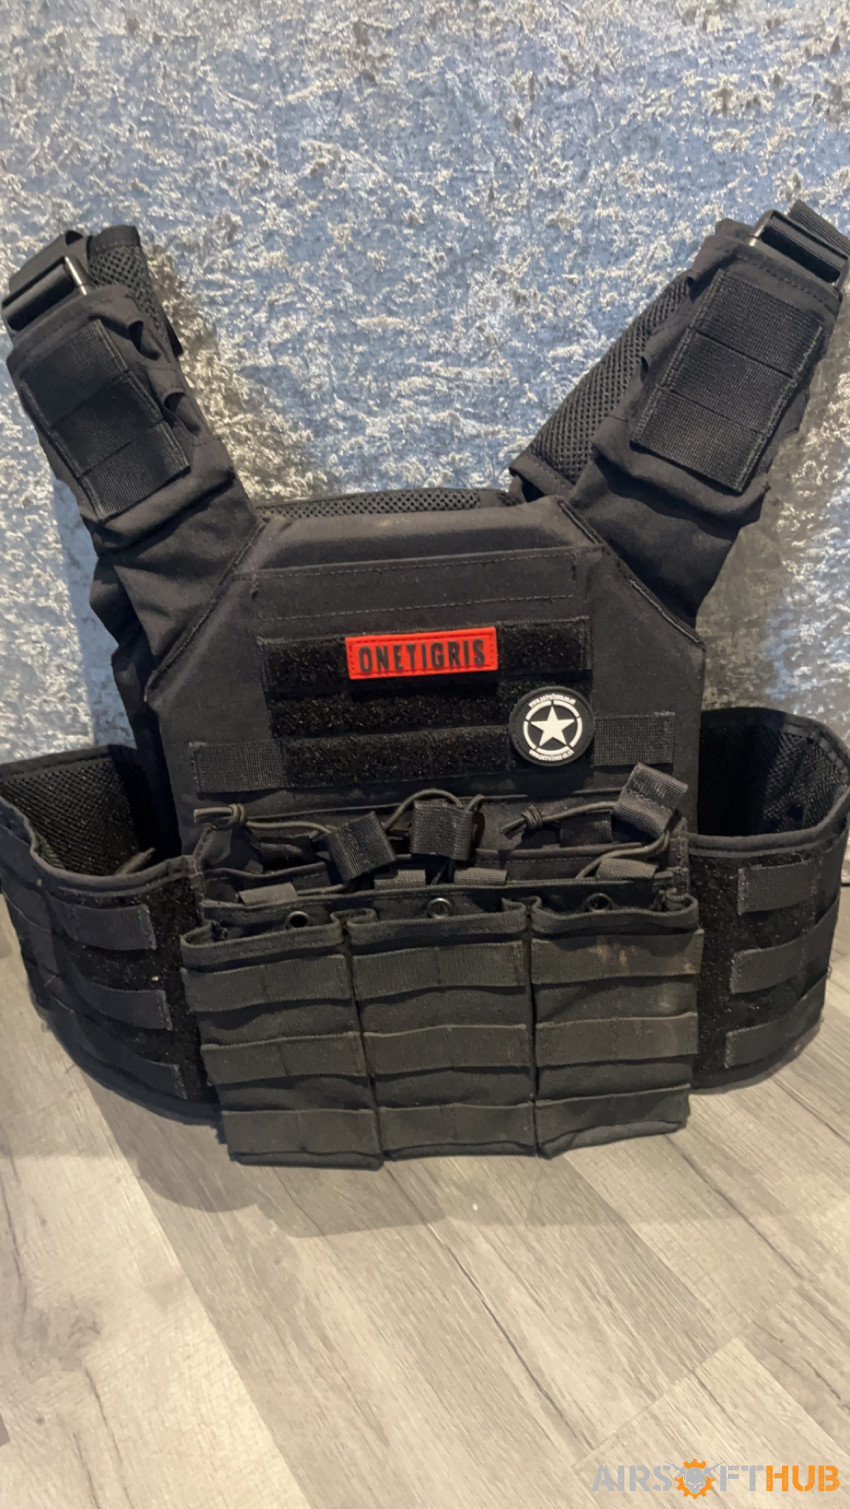 One Tigris chest rig - Used airsoft equipment